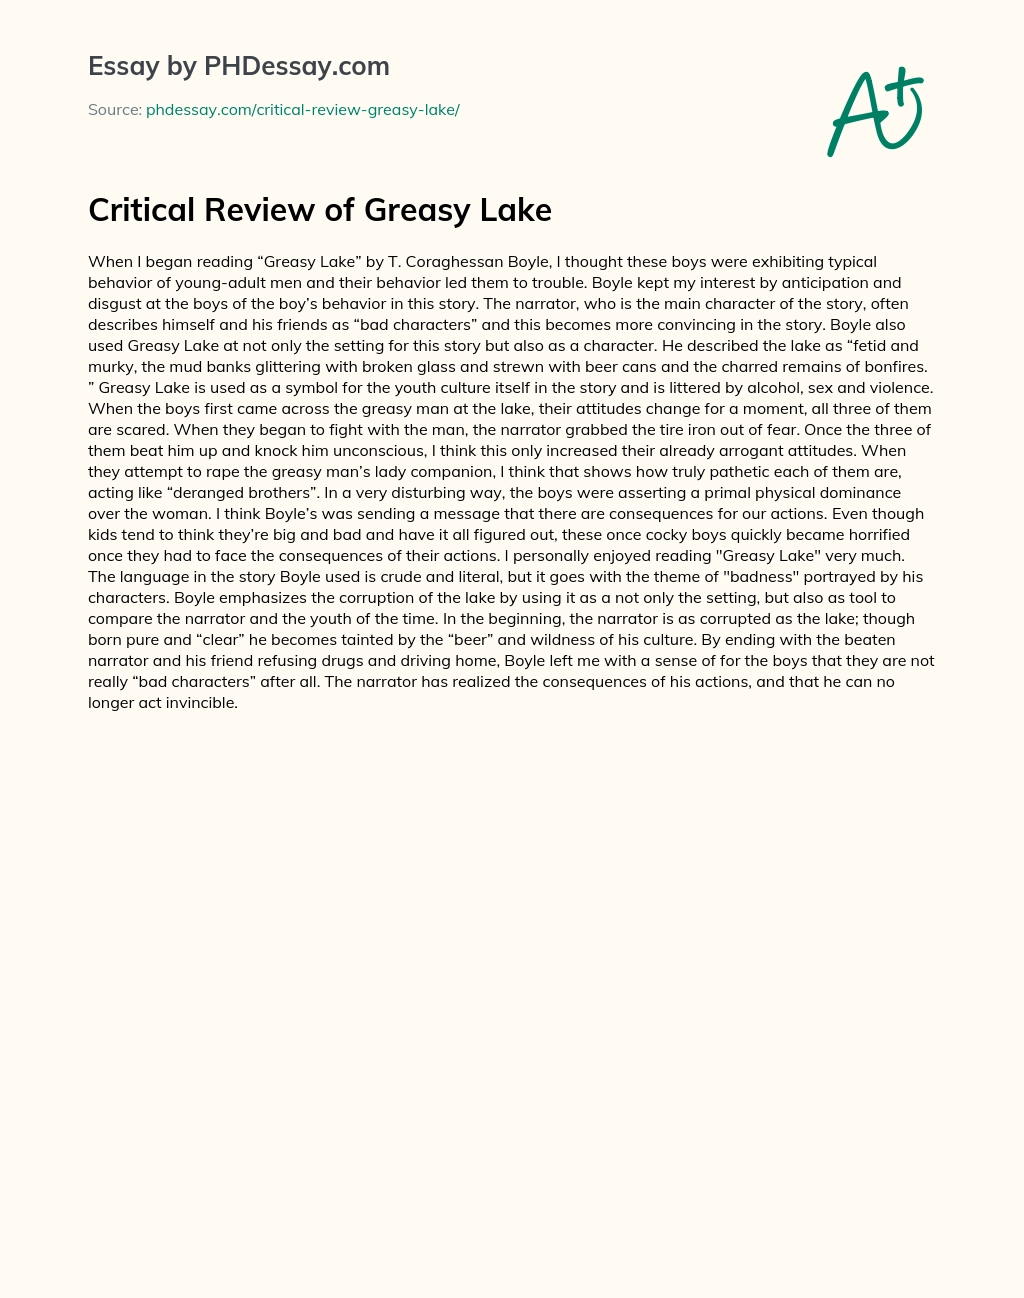 Critical Review of Greasy Lake essay